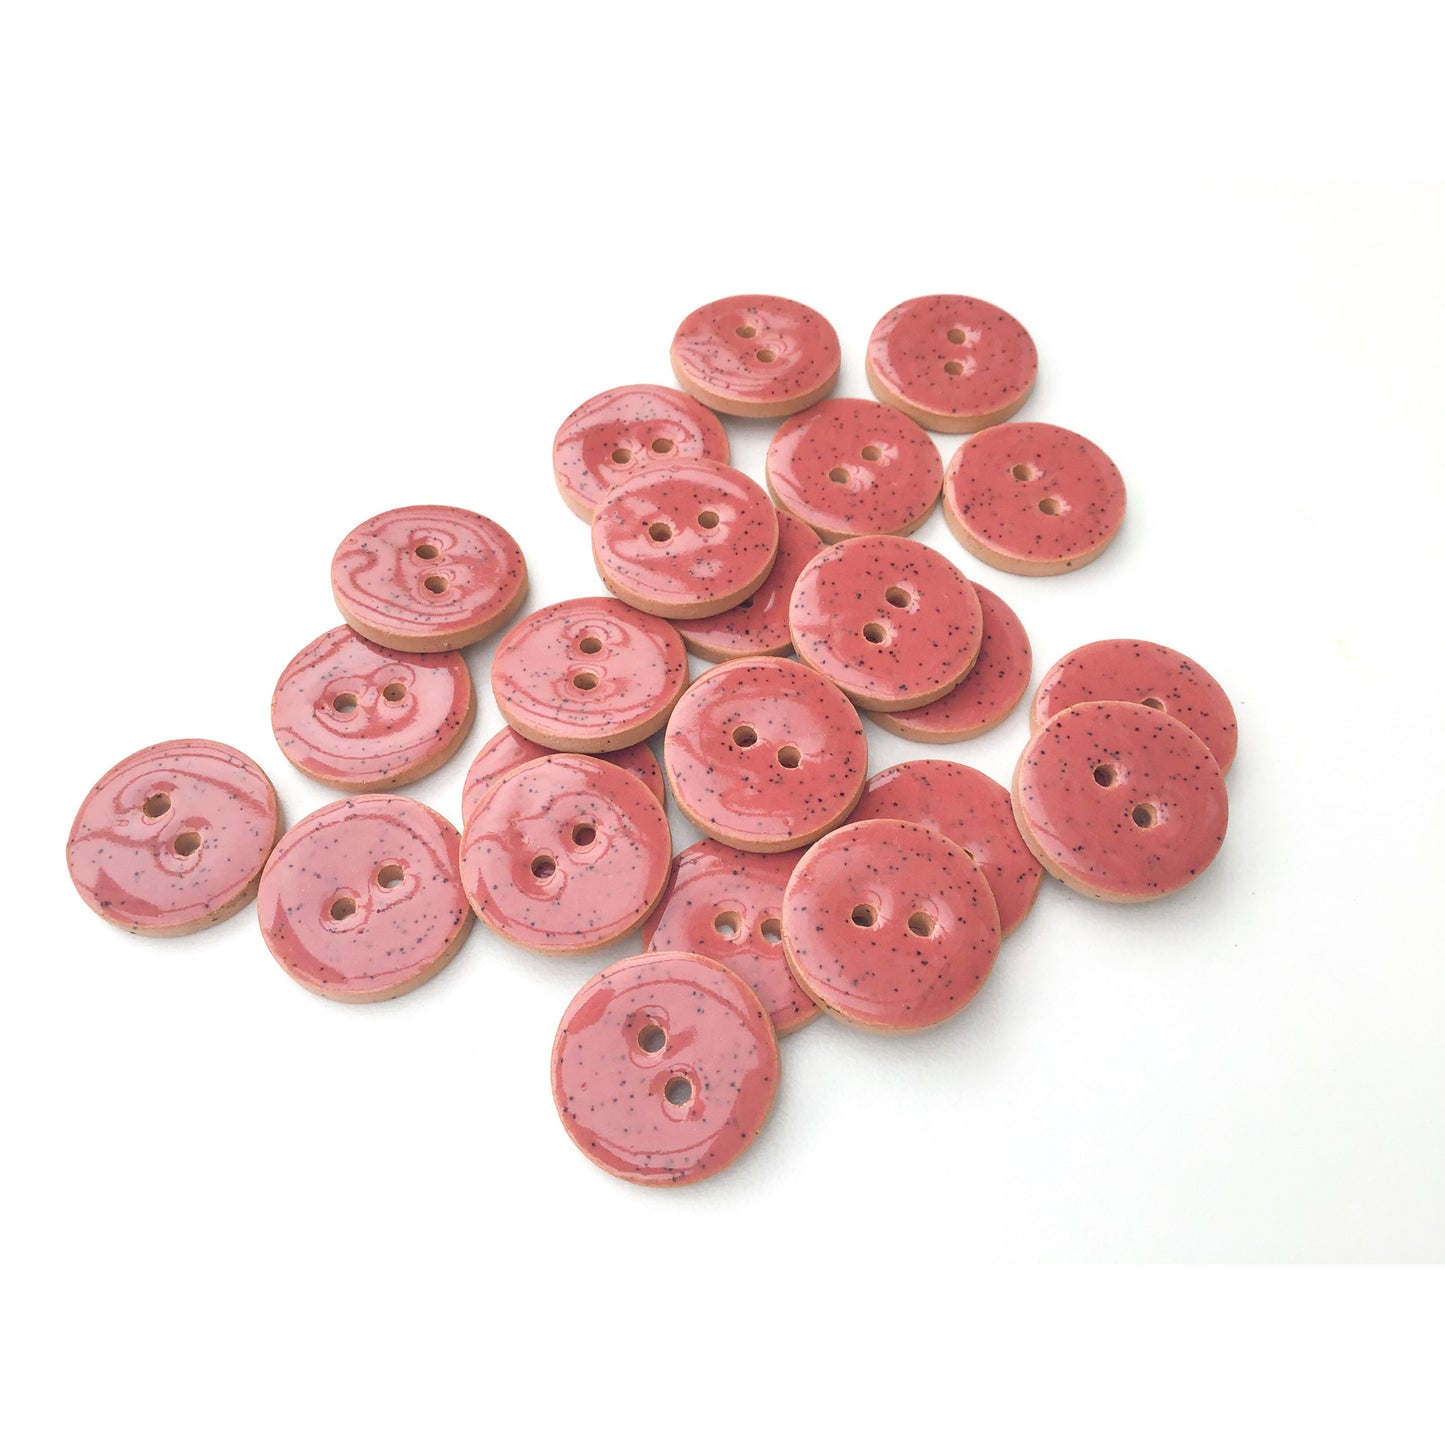 Earthy Pink Ceramic Buttons - Speckled Clay Buttons - 3/4" Buttons (ws-81)